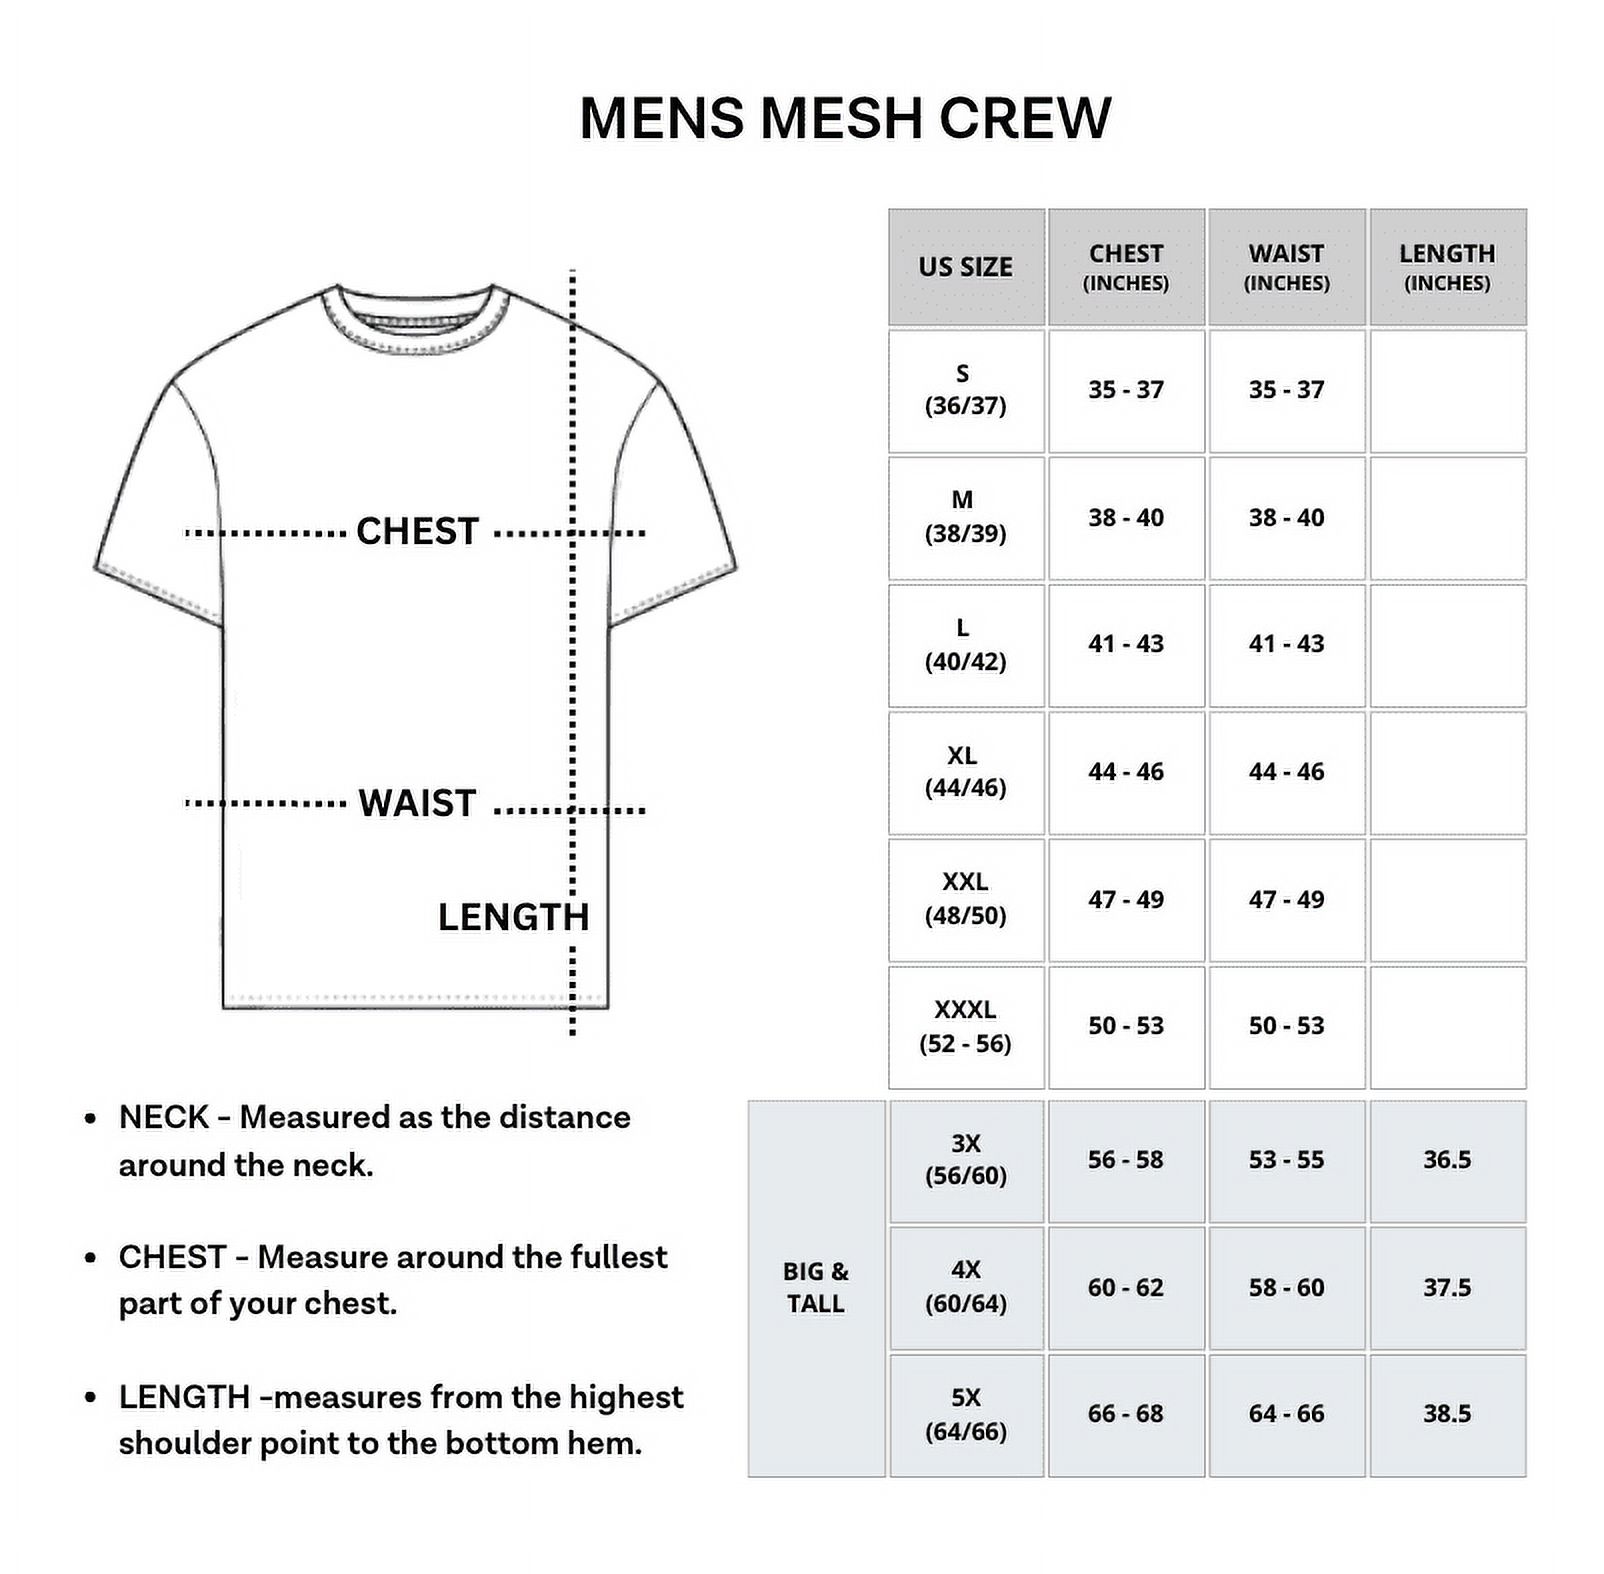 Real Essentials 5 Pack Men’s Active Quick Dry Mesh Crew Neck T Shirts | Athletic Short Sleeve Tee (Available in Big & Tall) - image 2 of 6